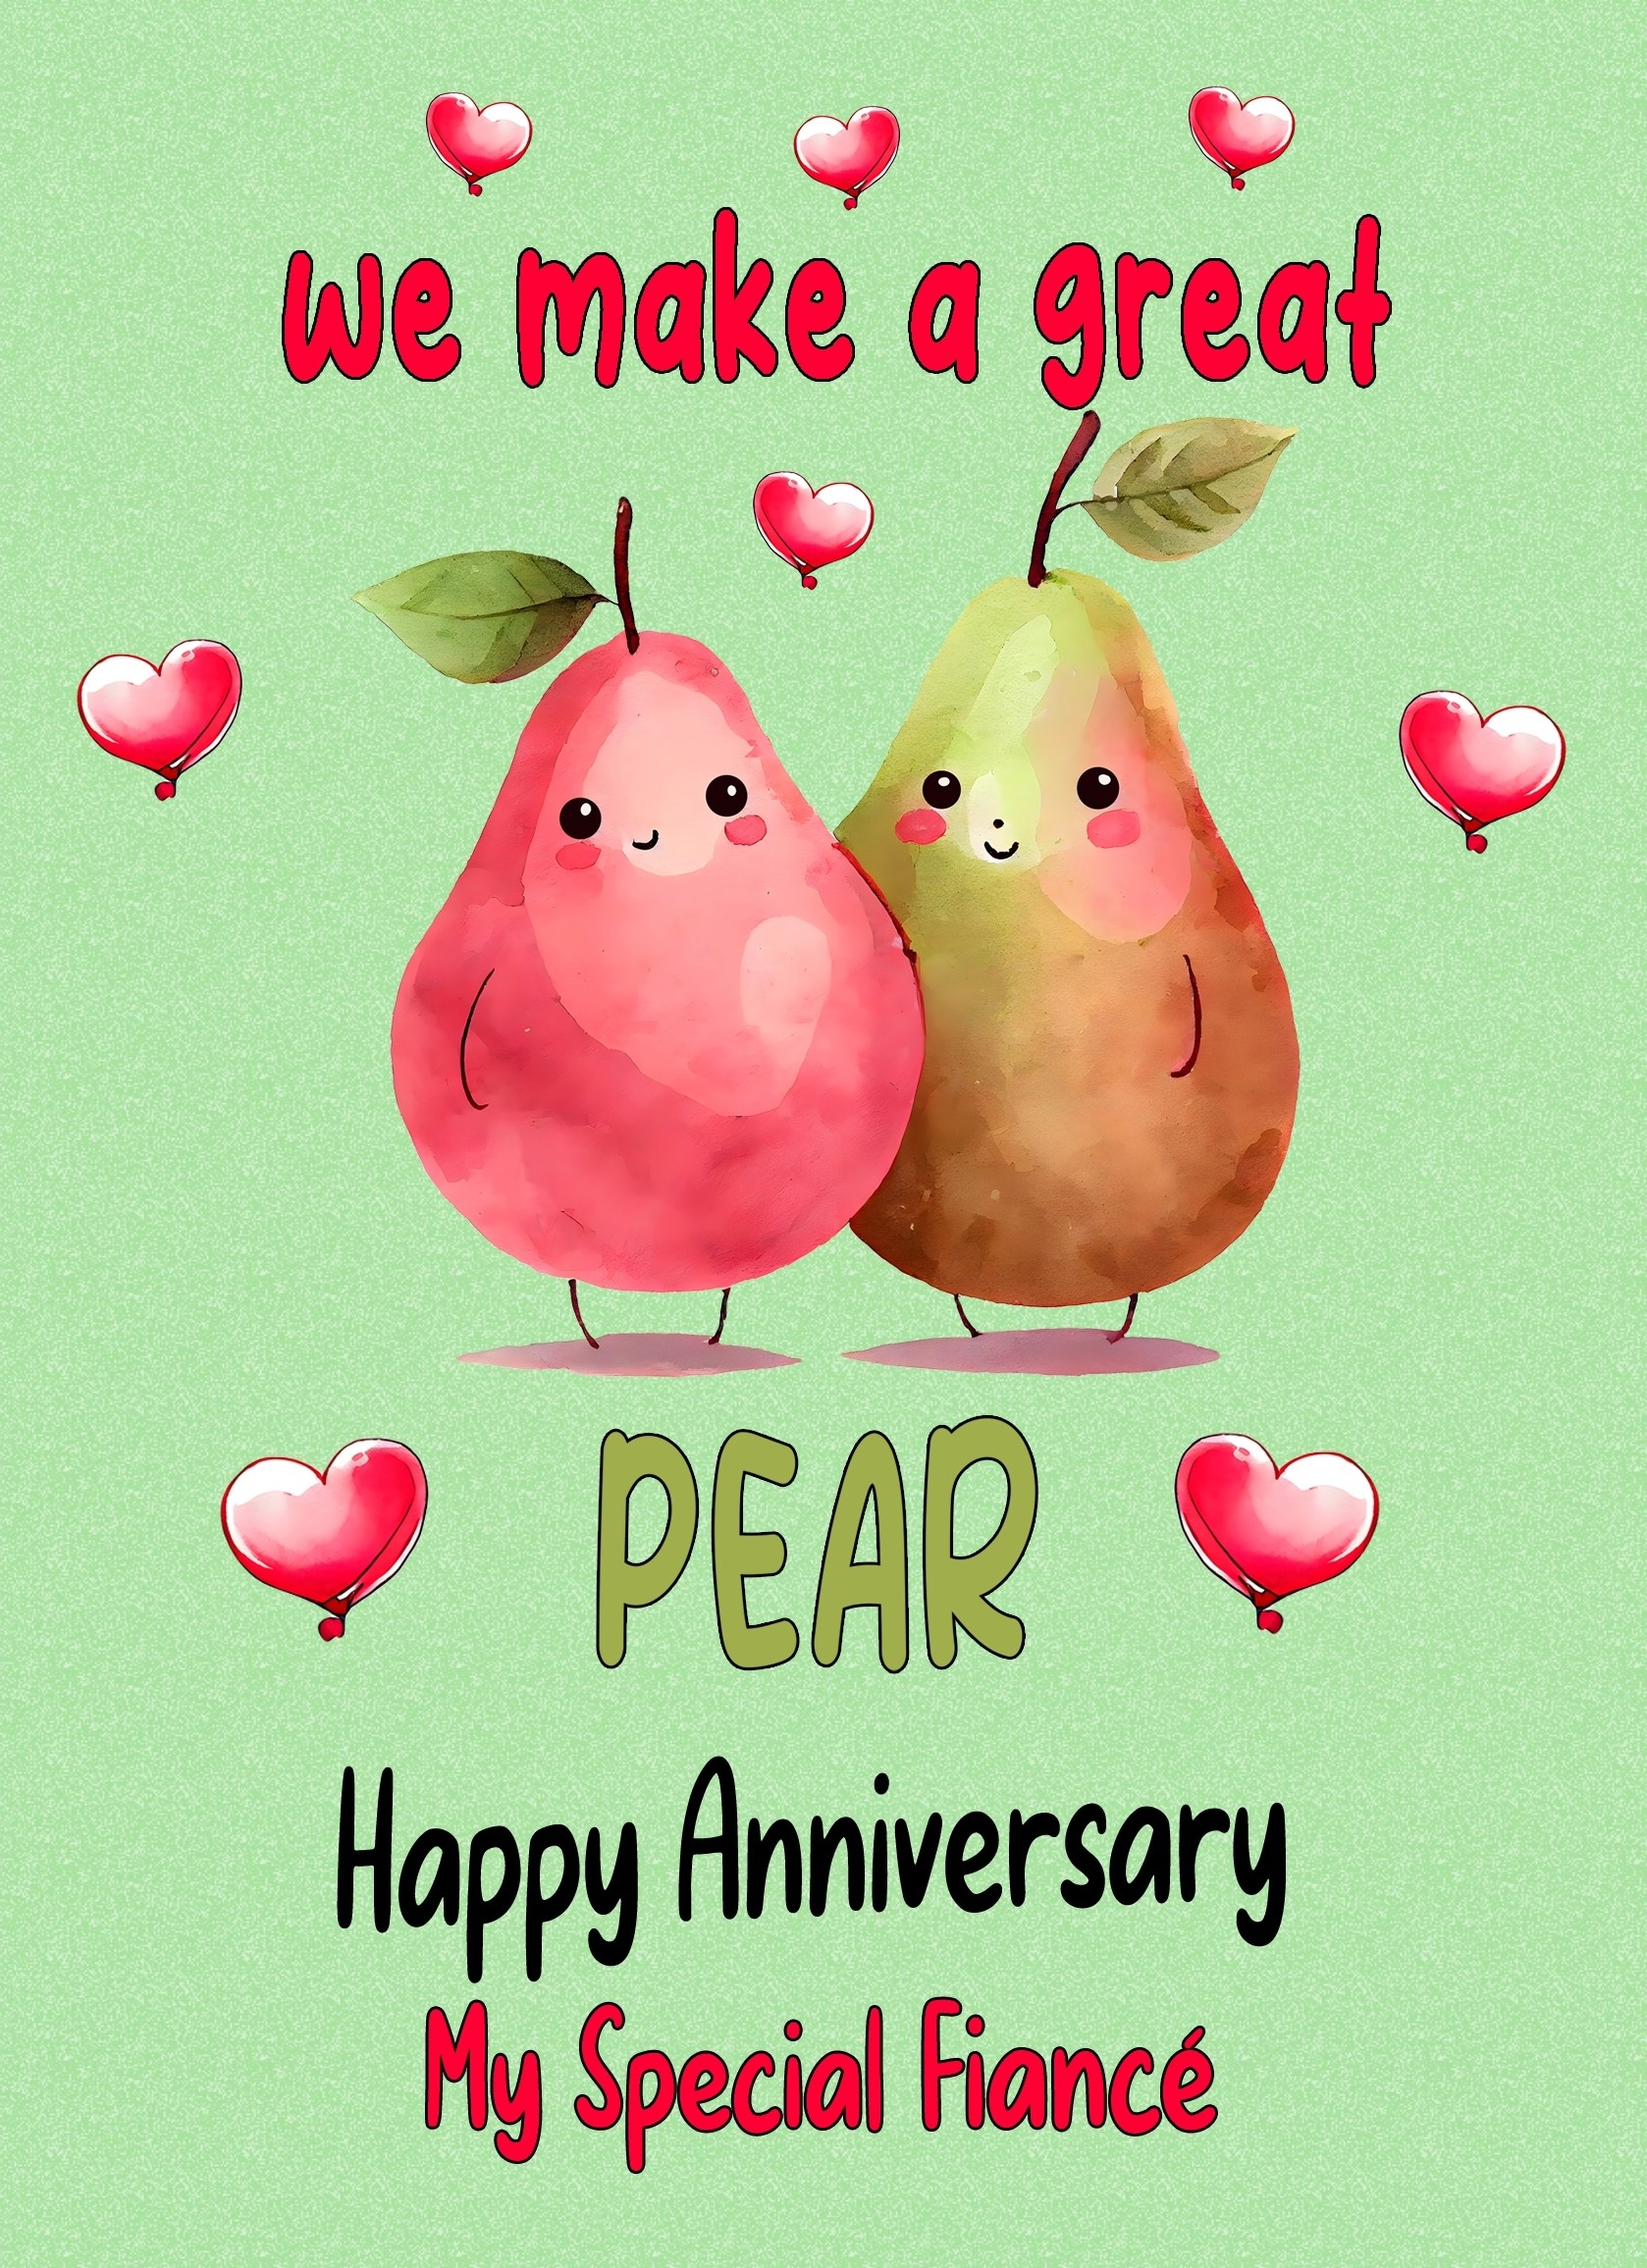 Funny Pun Romantic Anniversary Card for Fiance (Great Pear)